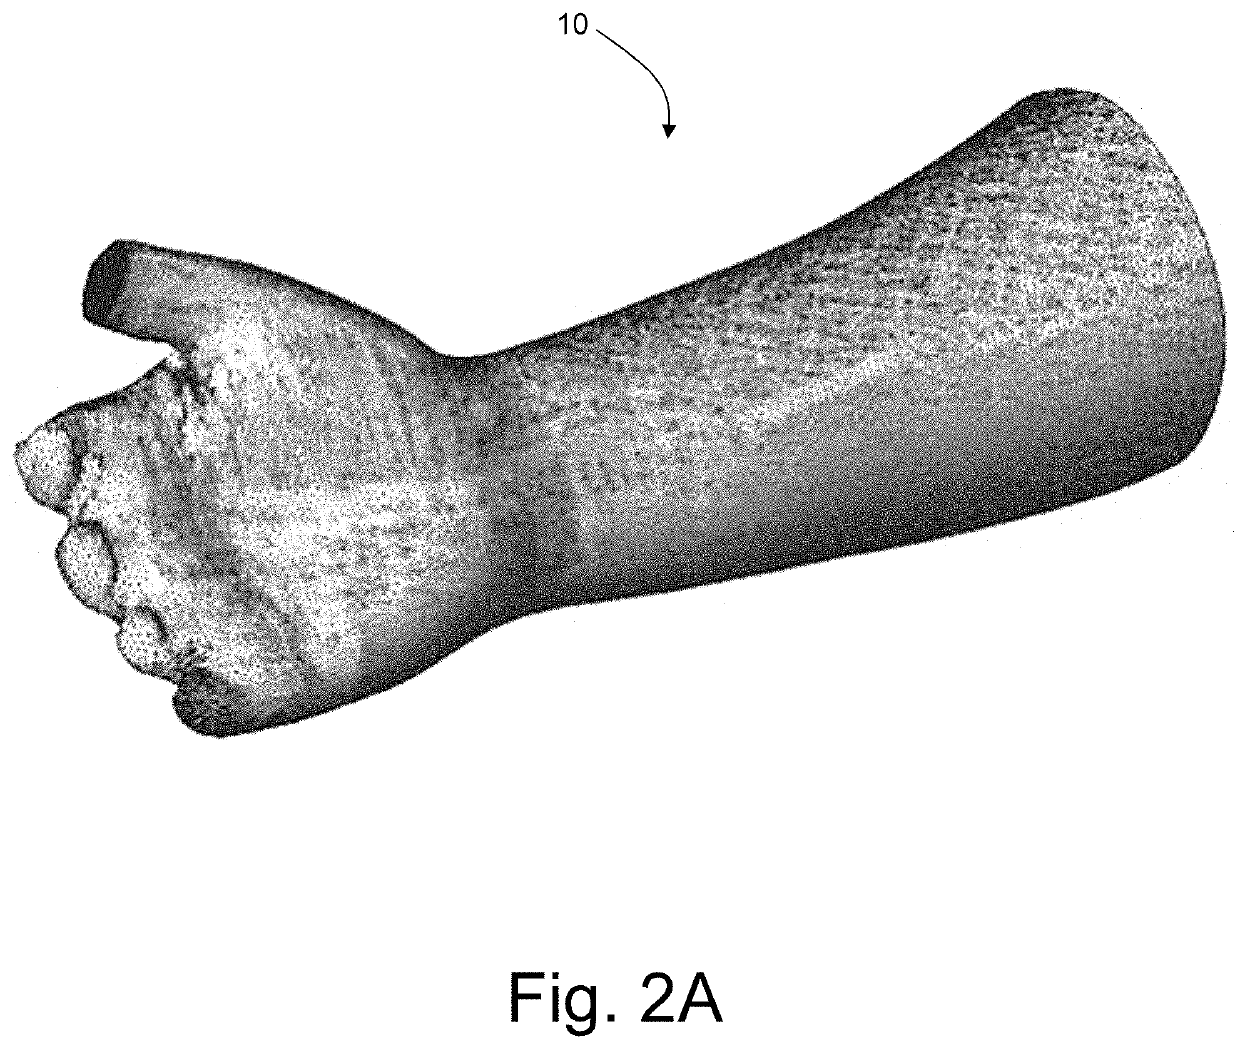 Production of a custom medical splint or brace for immobilization of a selected region of a patient's body part